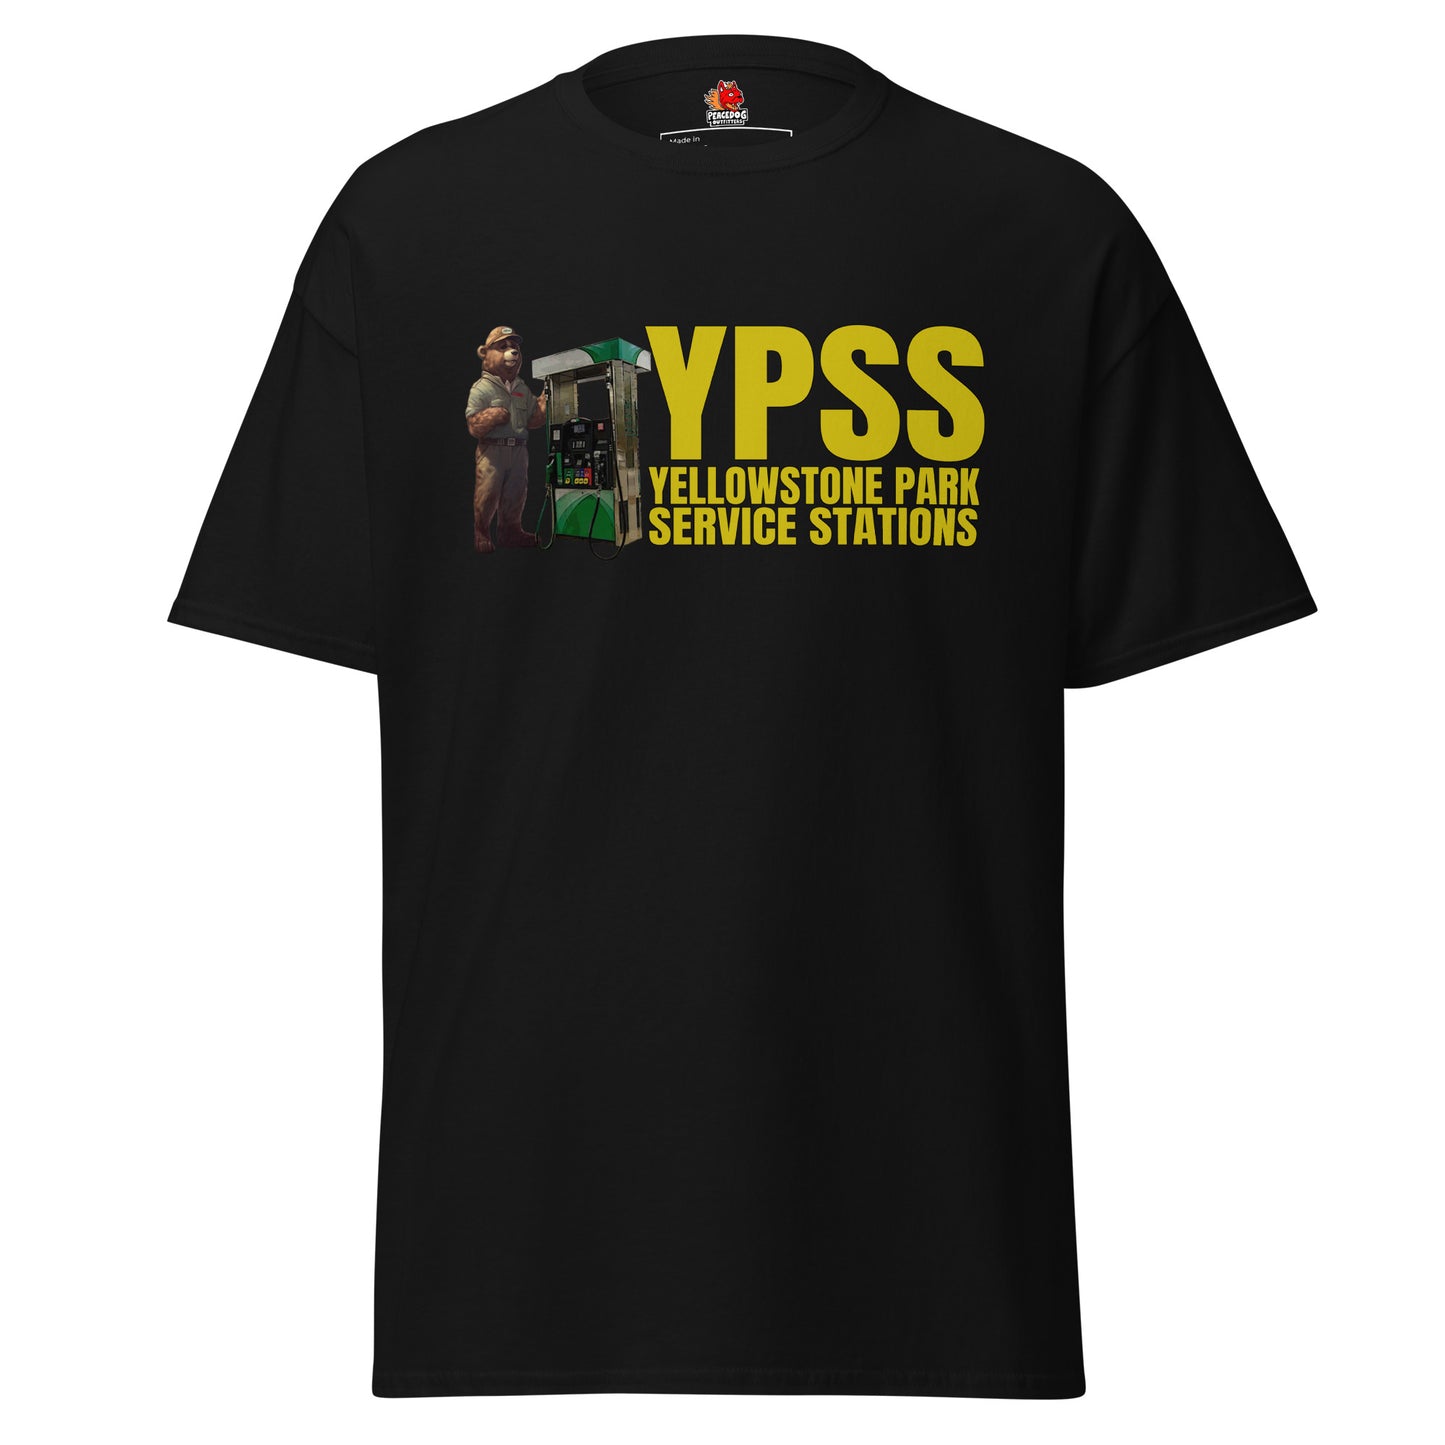 YPSS Yellowstone Park Service Stations Bear Front Print only Classic Tee